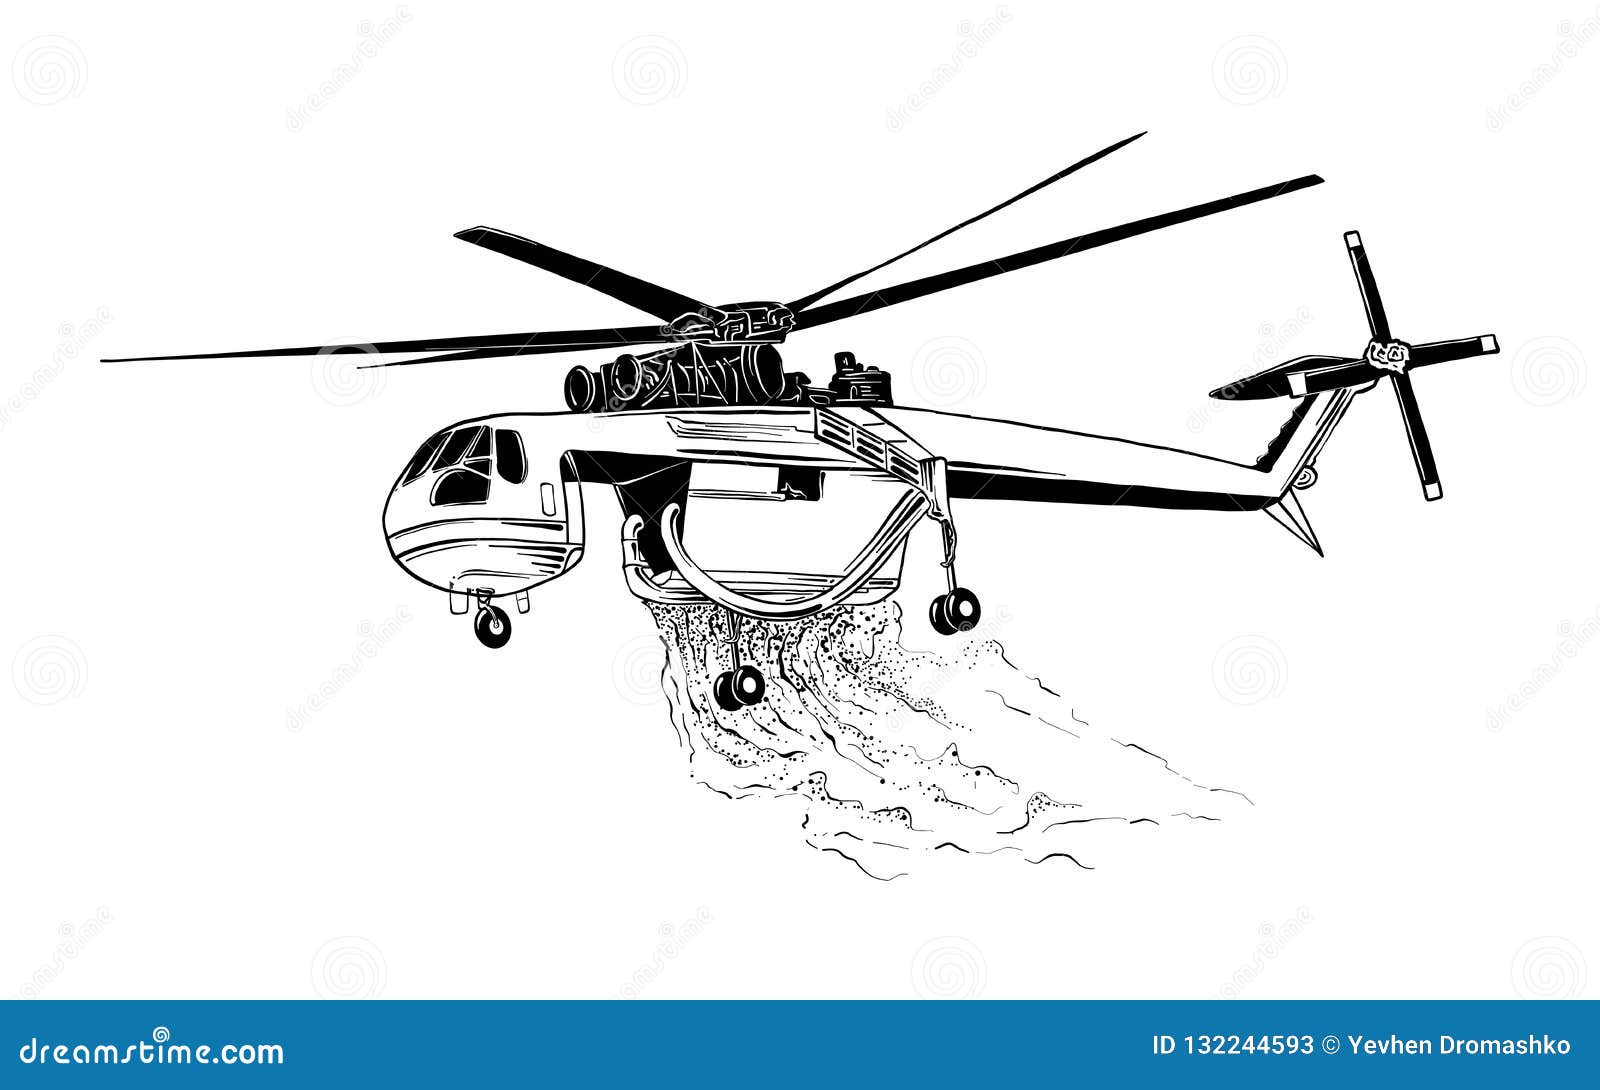 How to Draw a Police Helicopter | Helicopter, Airplane drawing, Step by  step drawing